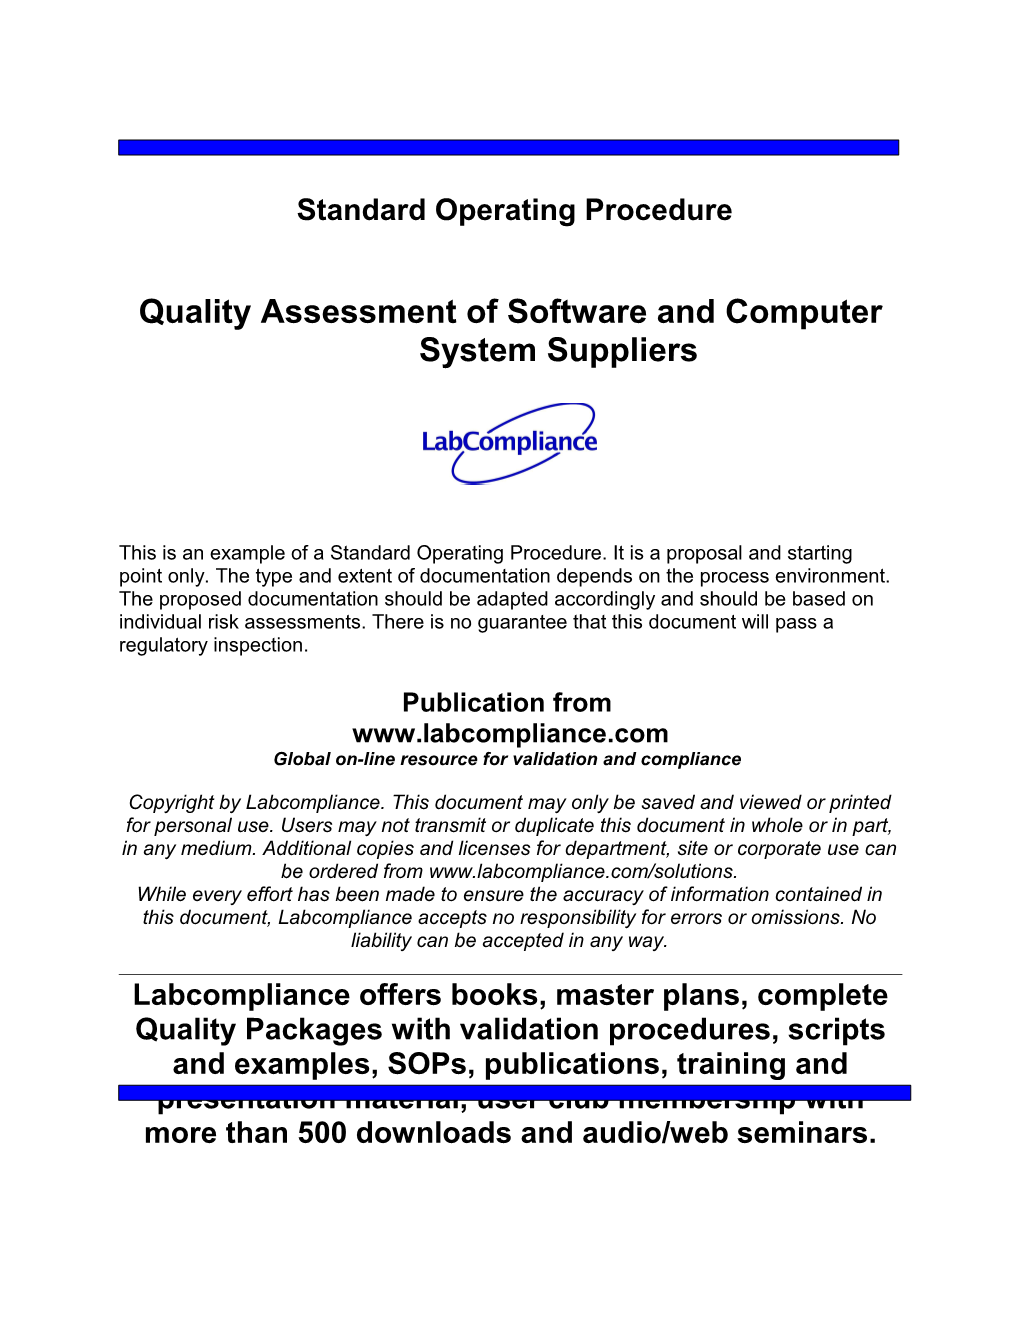 Quality Assessment of Software and Computer System Suppliers